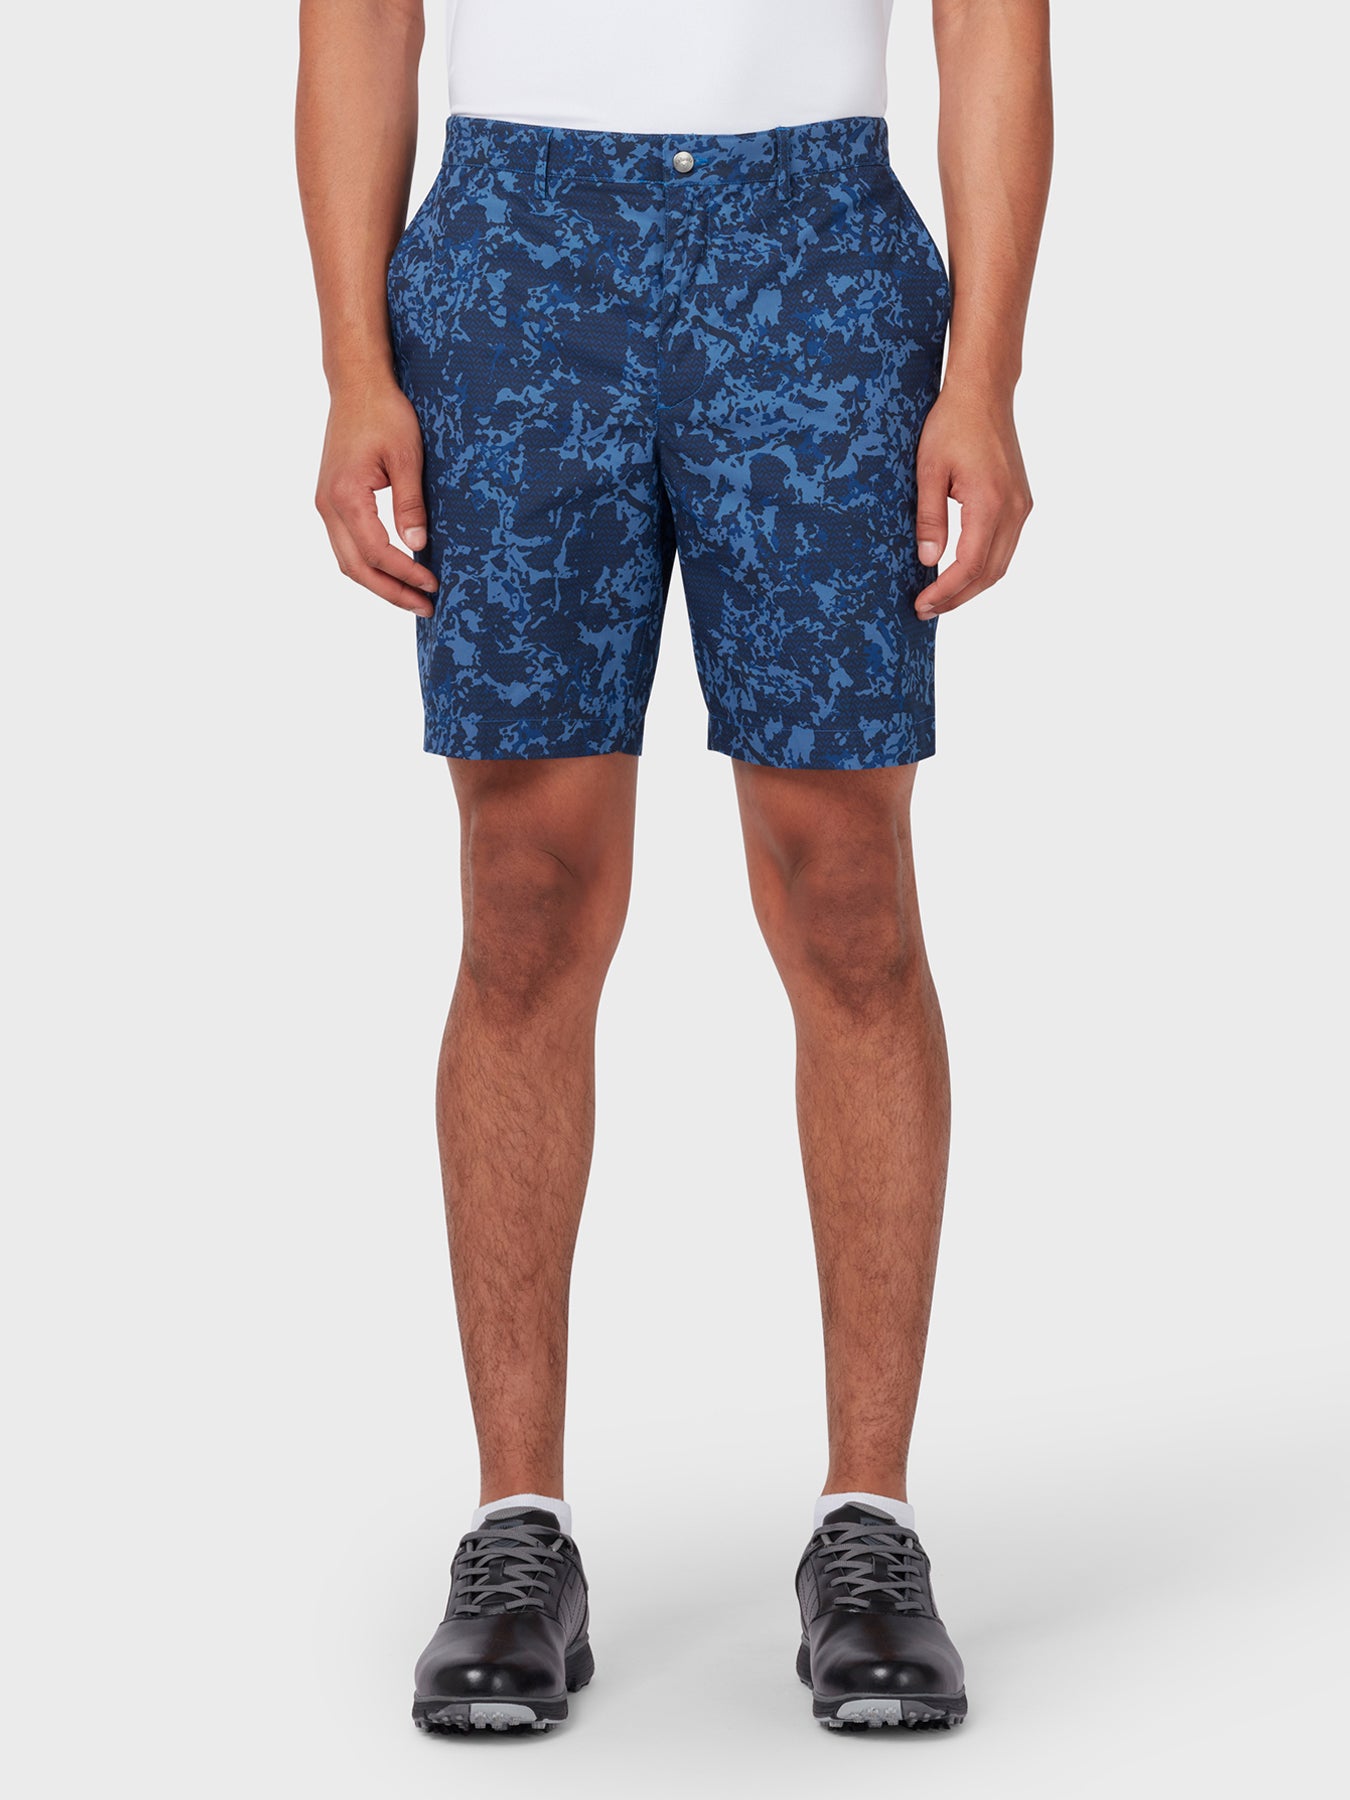 View X Series Abstract Camo Shorts In Navy Blazer information